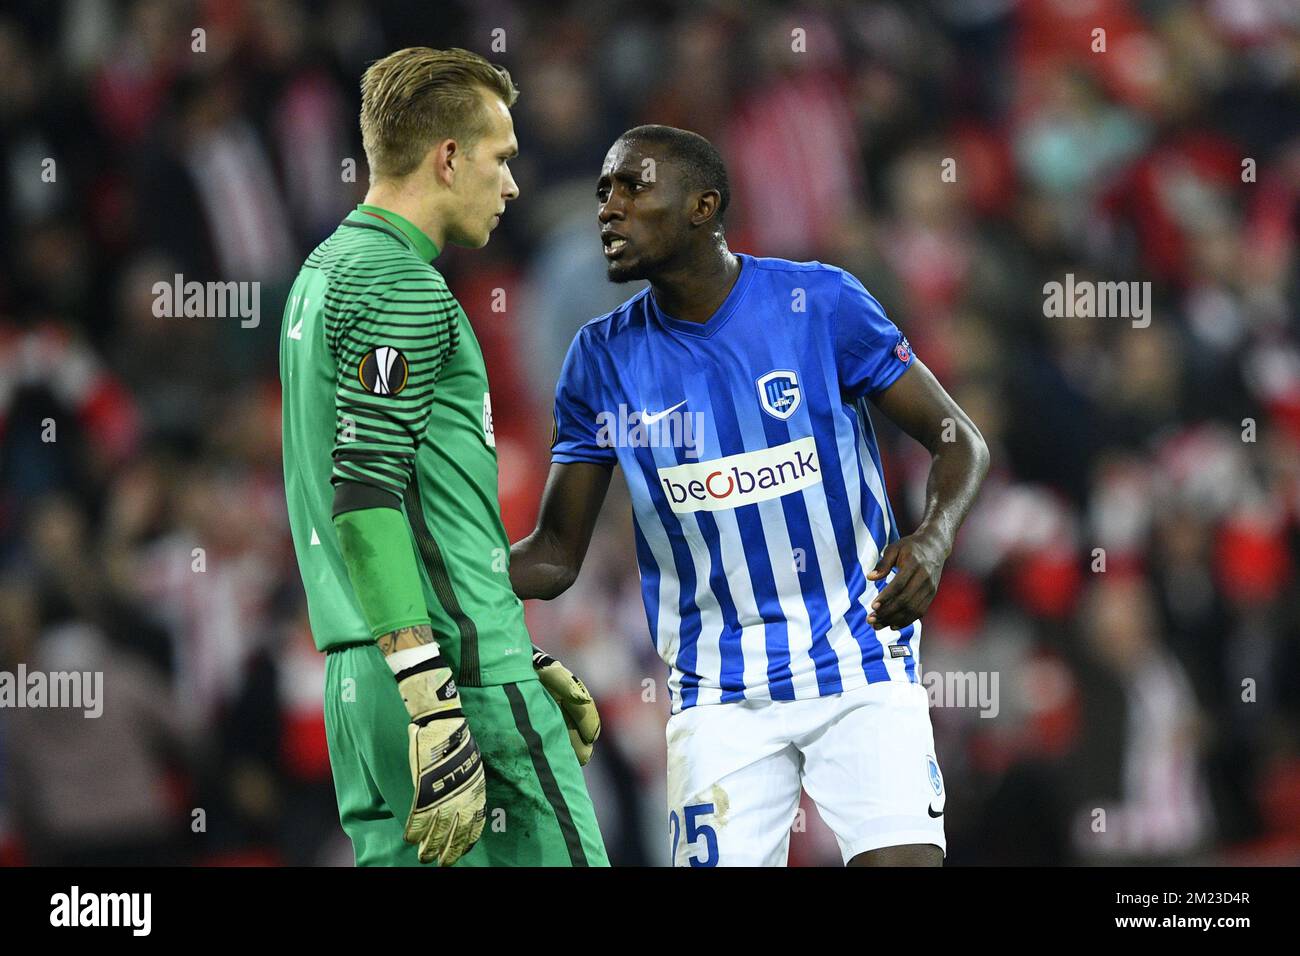 Genk's goalkeeper Marco Bizot and Genk's Wilfried Onyinye Ndidi pictured during a soccer game between Spanish Club Athletic Bilbao and Belgian team KRC Genk in Bilbao, Spain, Thursday 03 November 2016, the fourth game of the group stage of the Europa League competition in Group F. BELGA PHOTO YORICK JANSENS Stock Photo